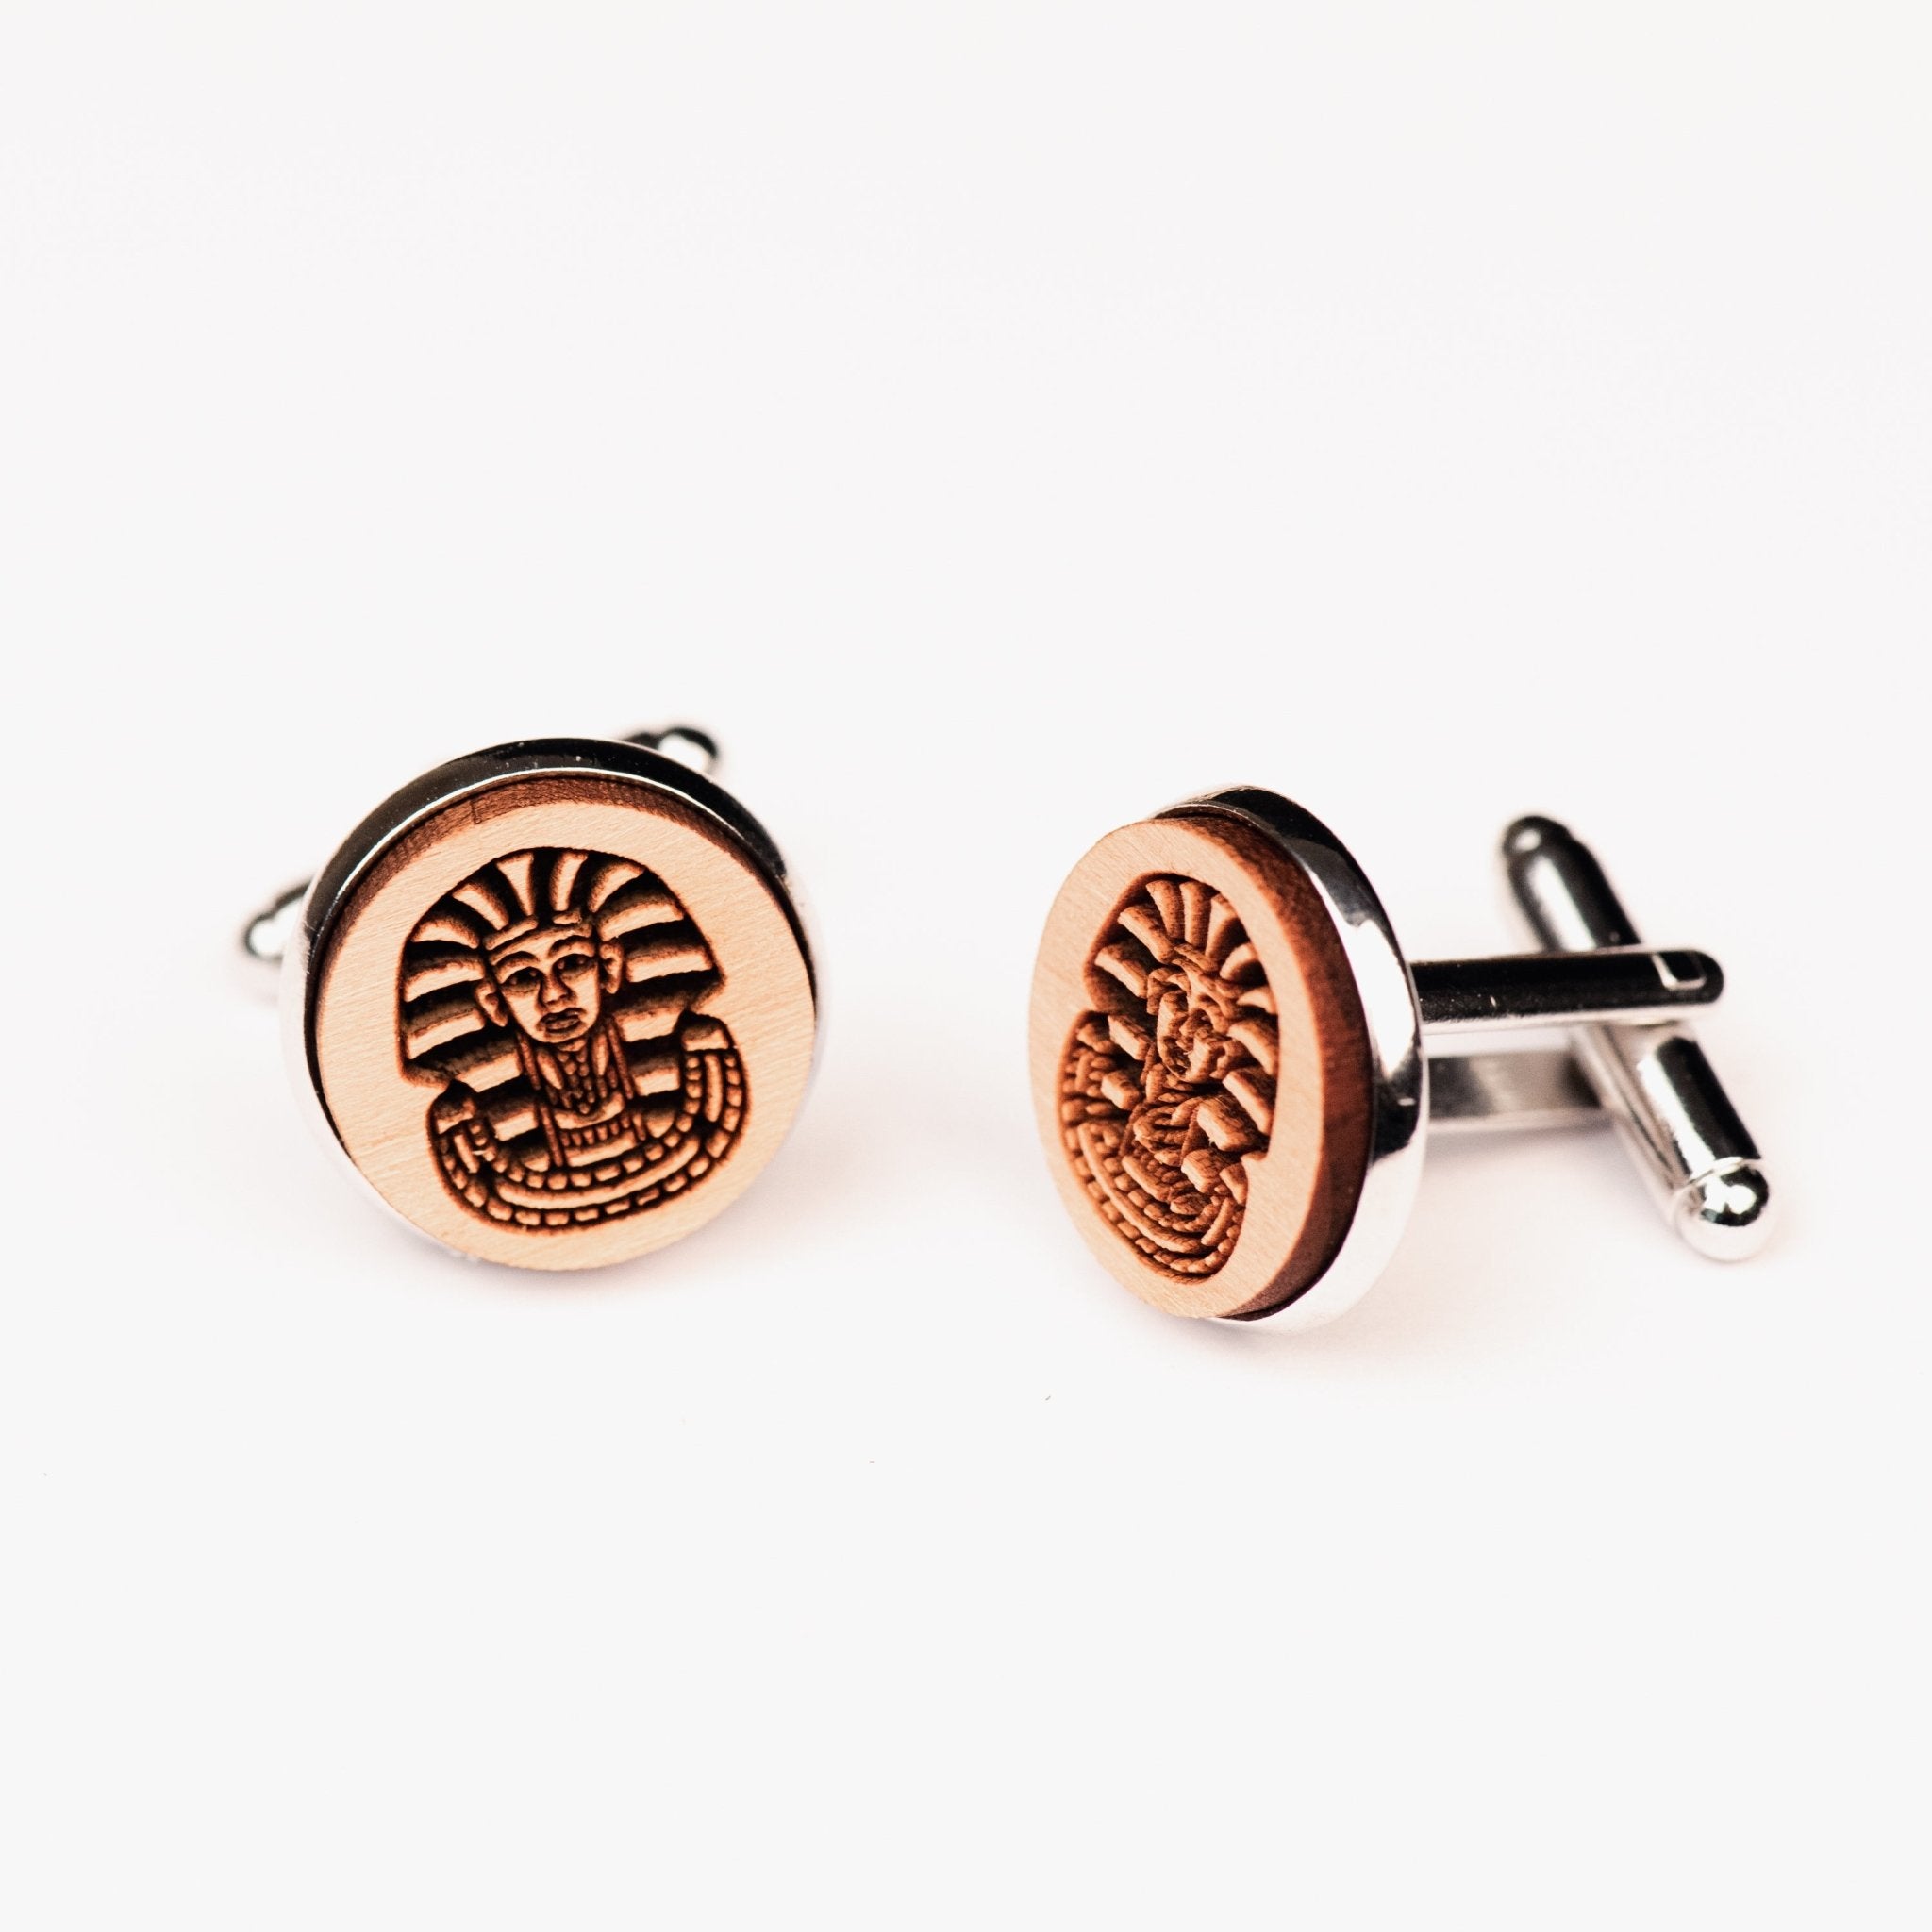 Egyptian Pharaoh Cherry Wood Cufflinks - CT35042 - Robin Valley Official Store